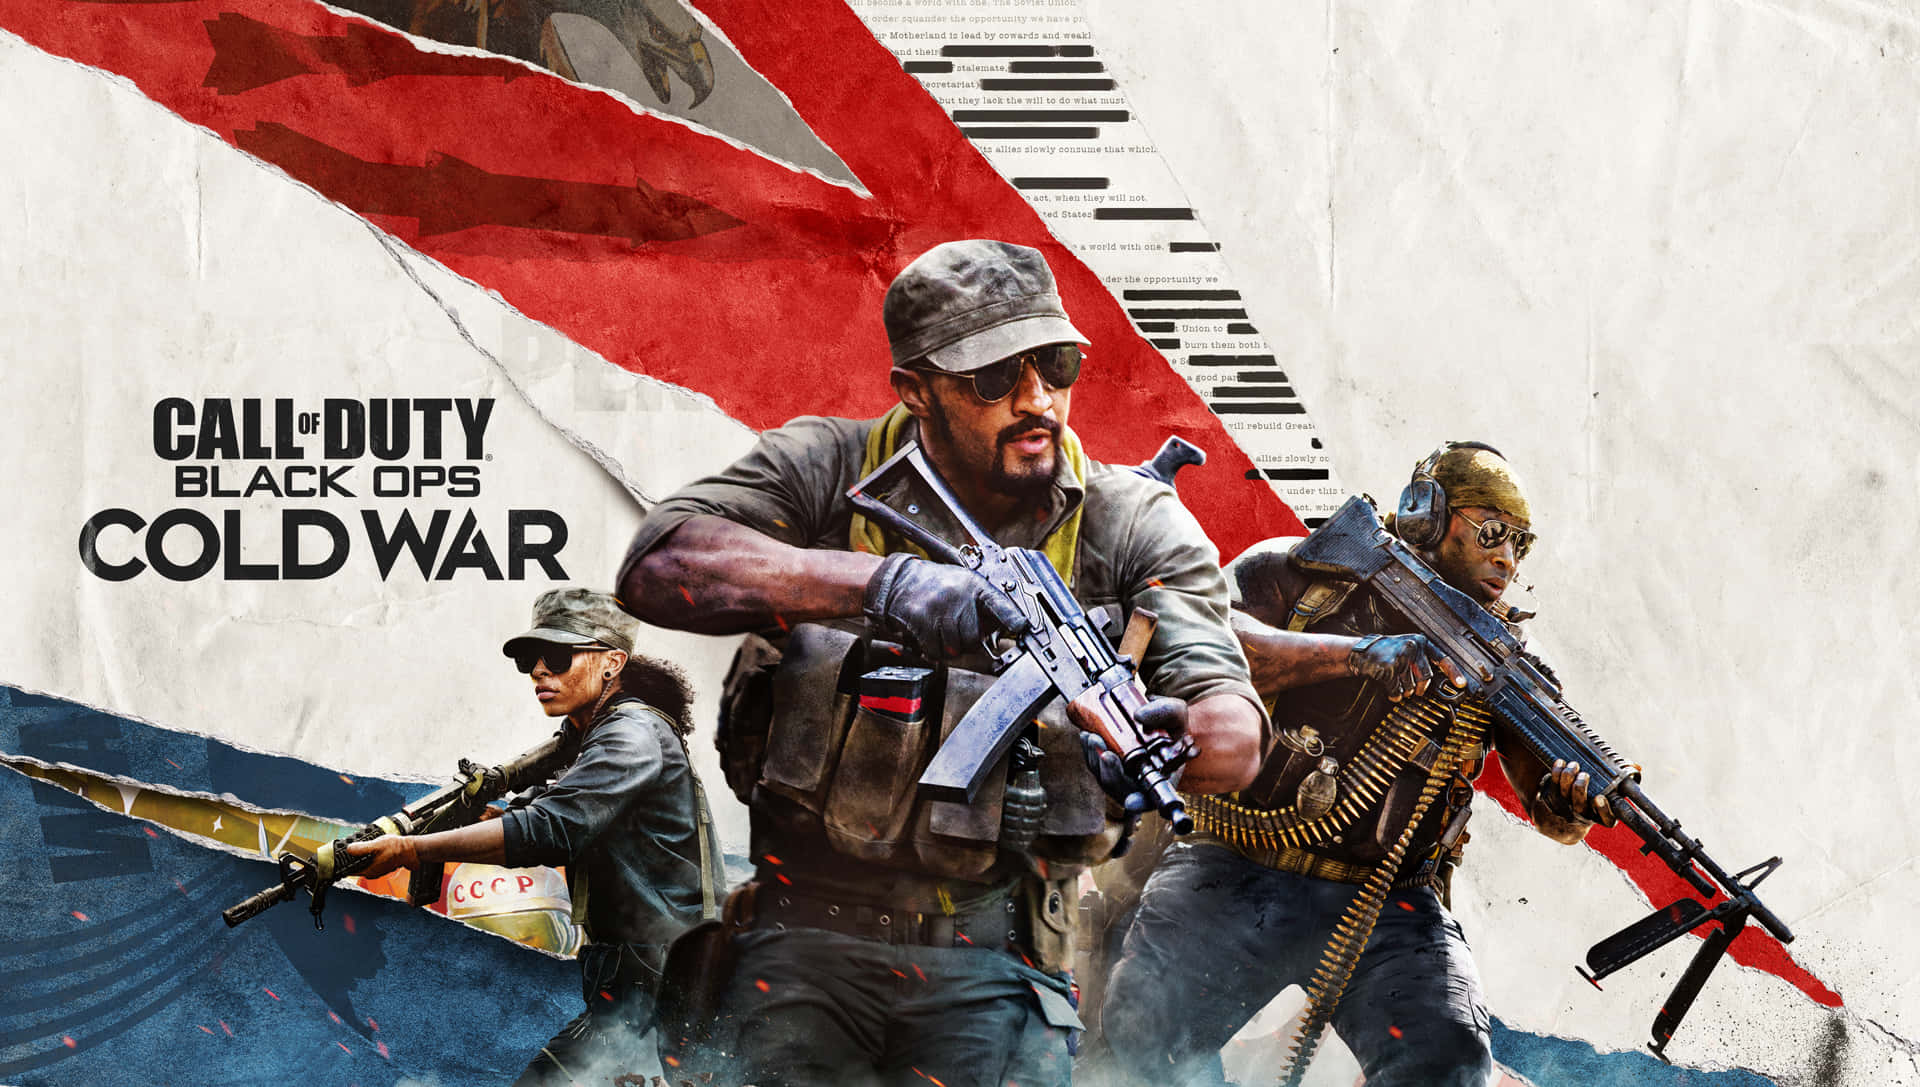 Experience the intense new Cold War conflict in Call of Duty: Black Ops Cold War.